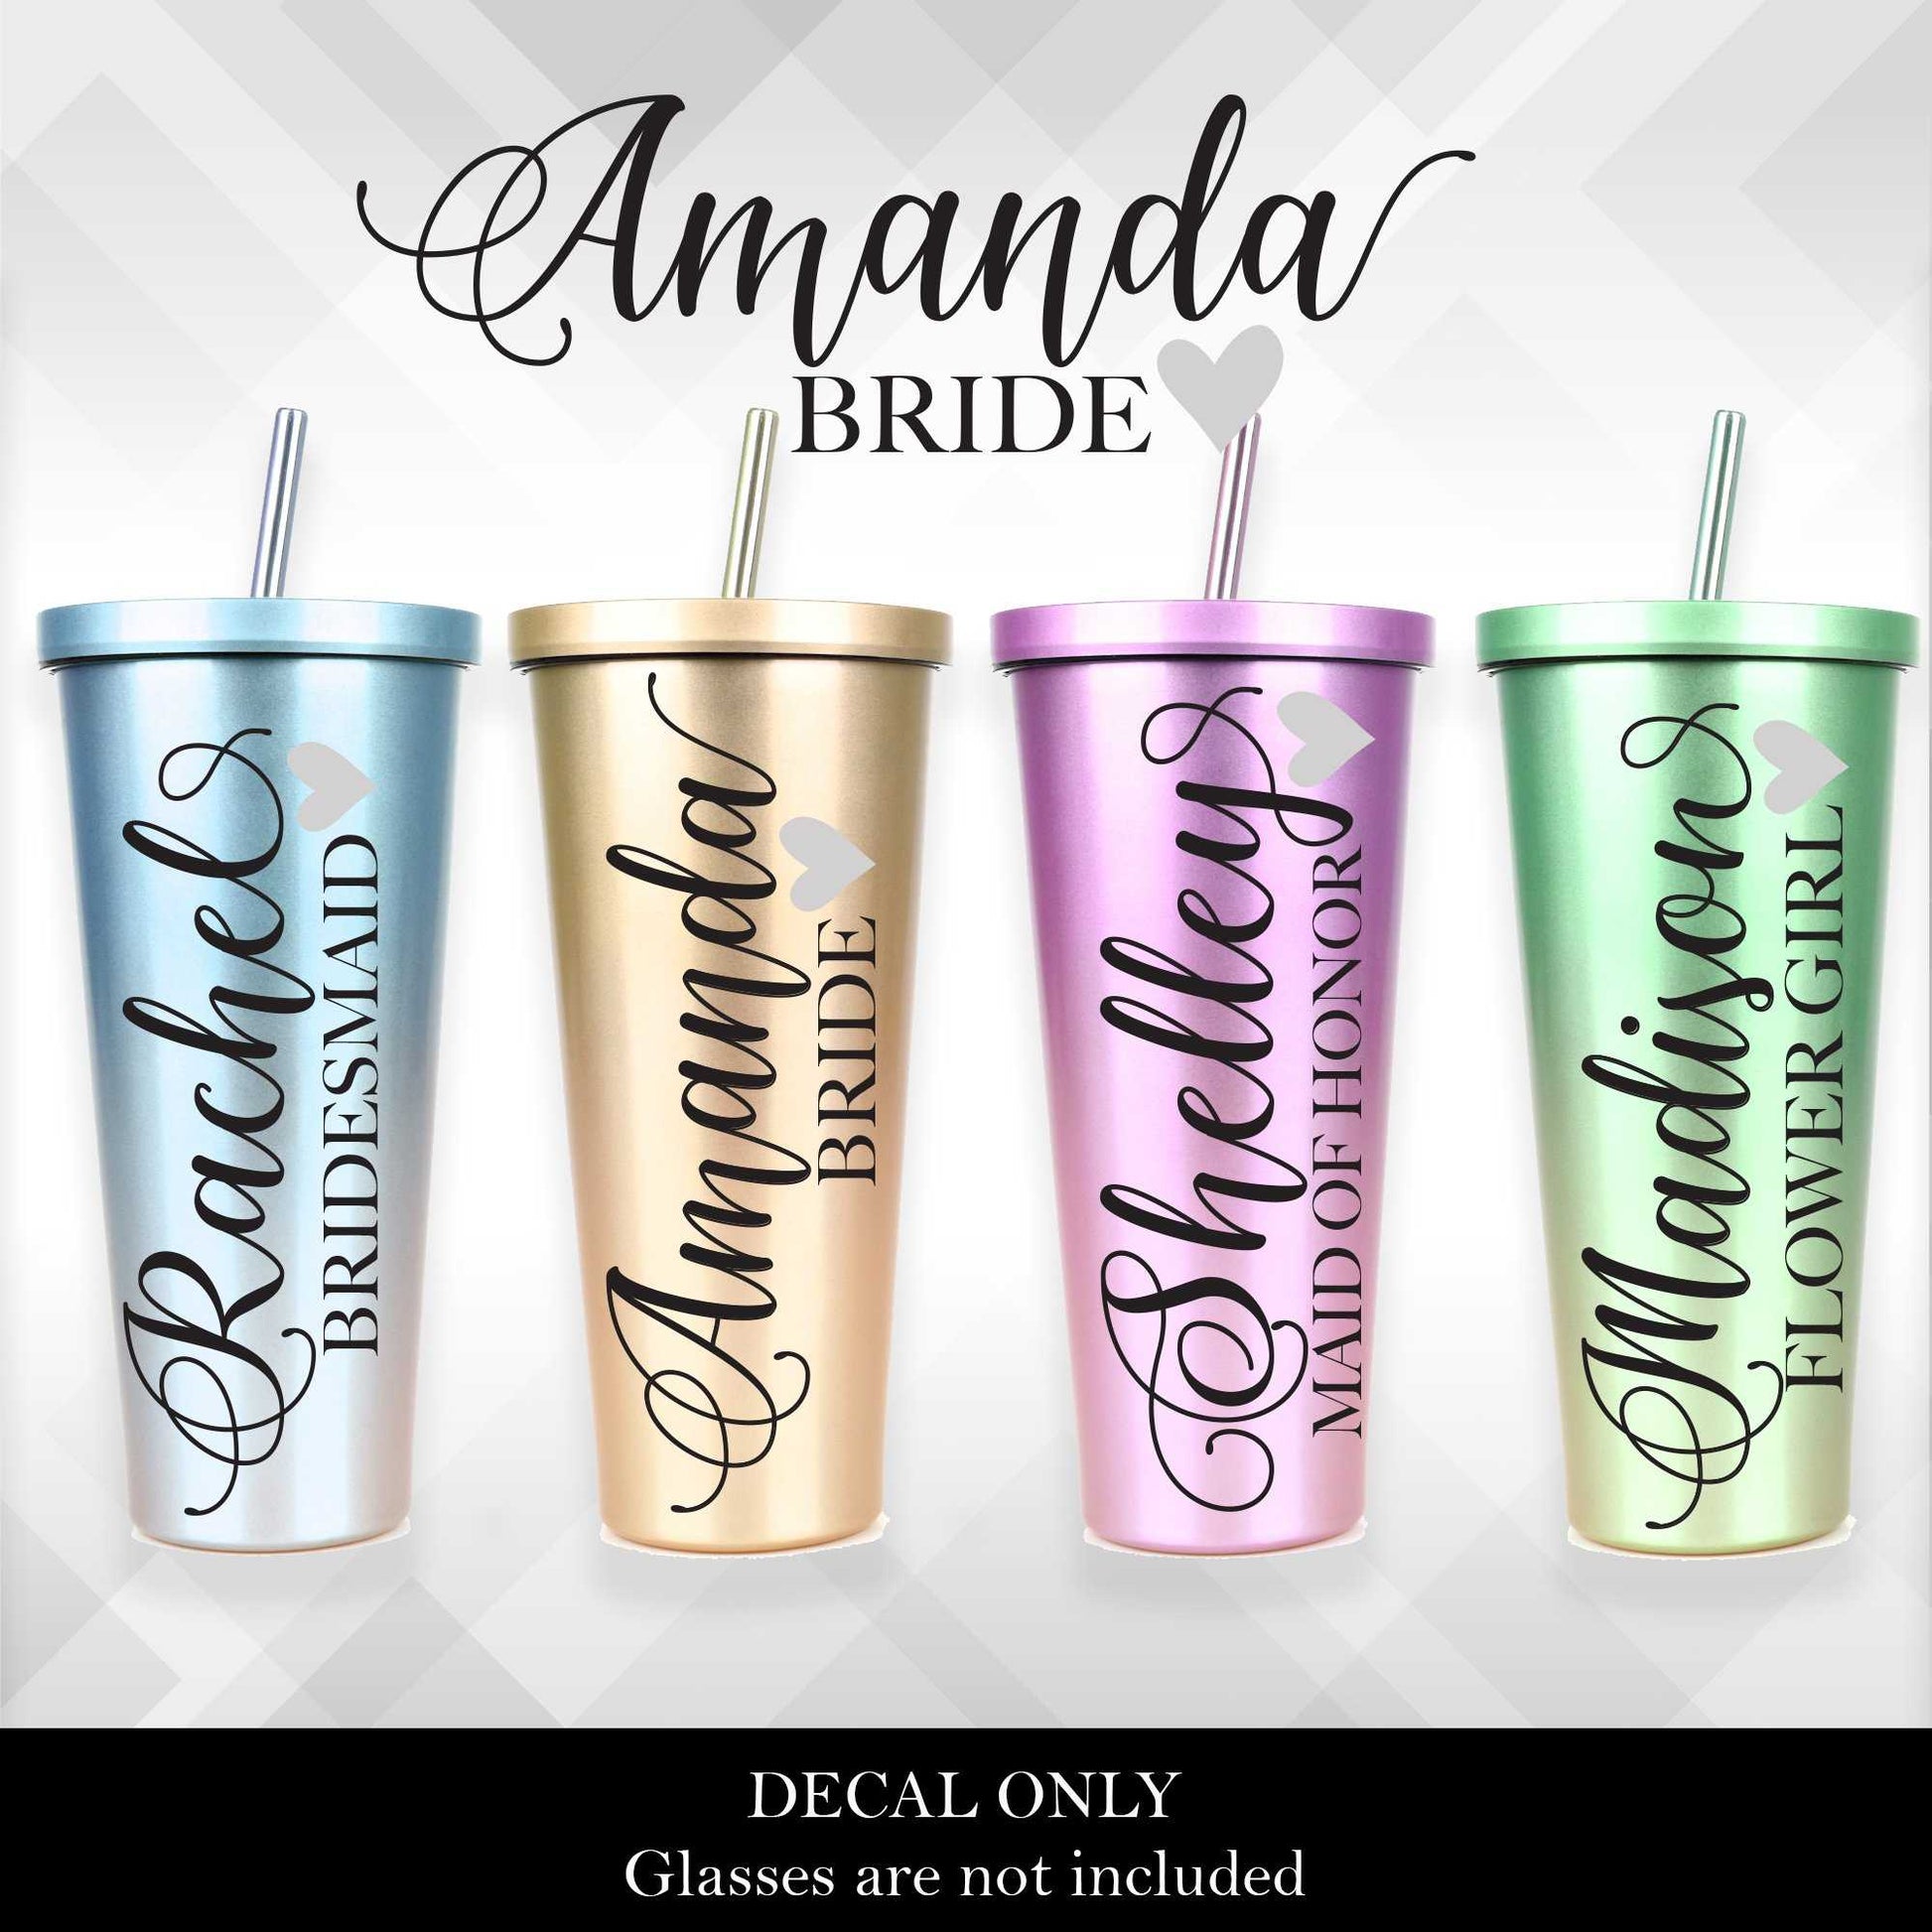 Bridal and Wedding Party Glass Tumbler Decal - Vinyl Sticker - Heart